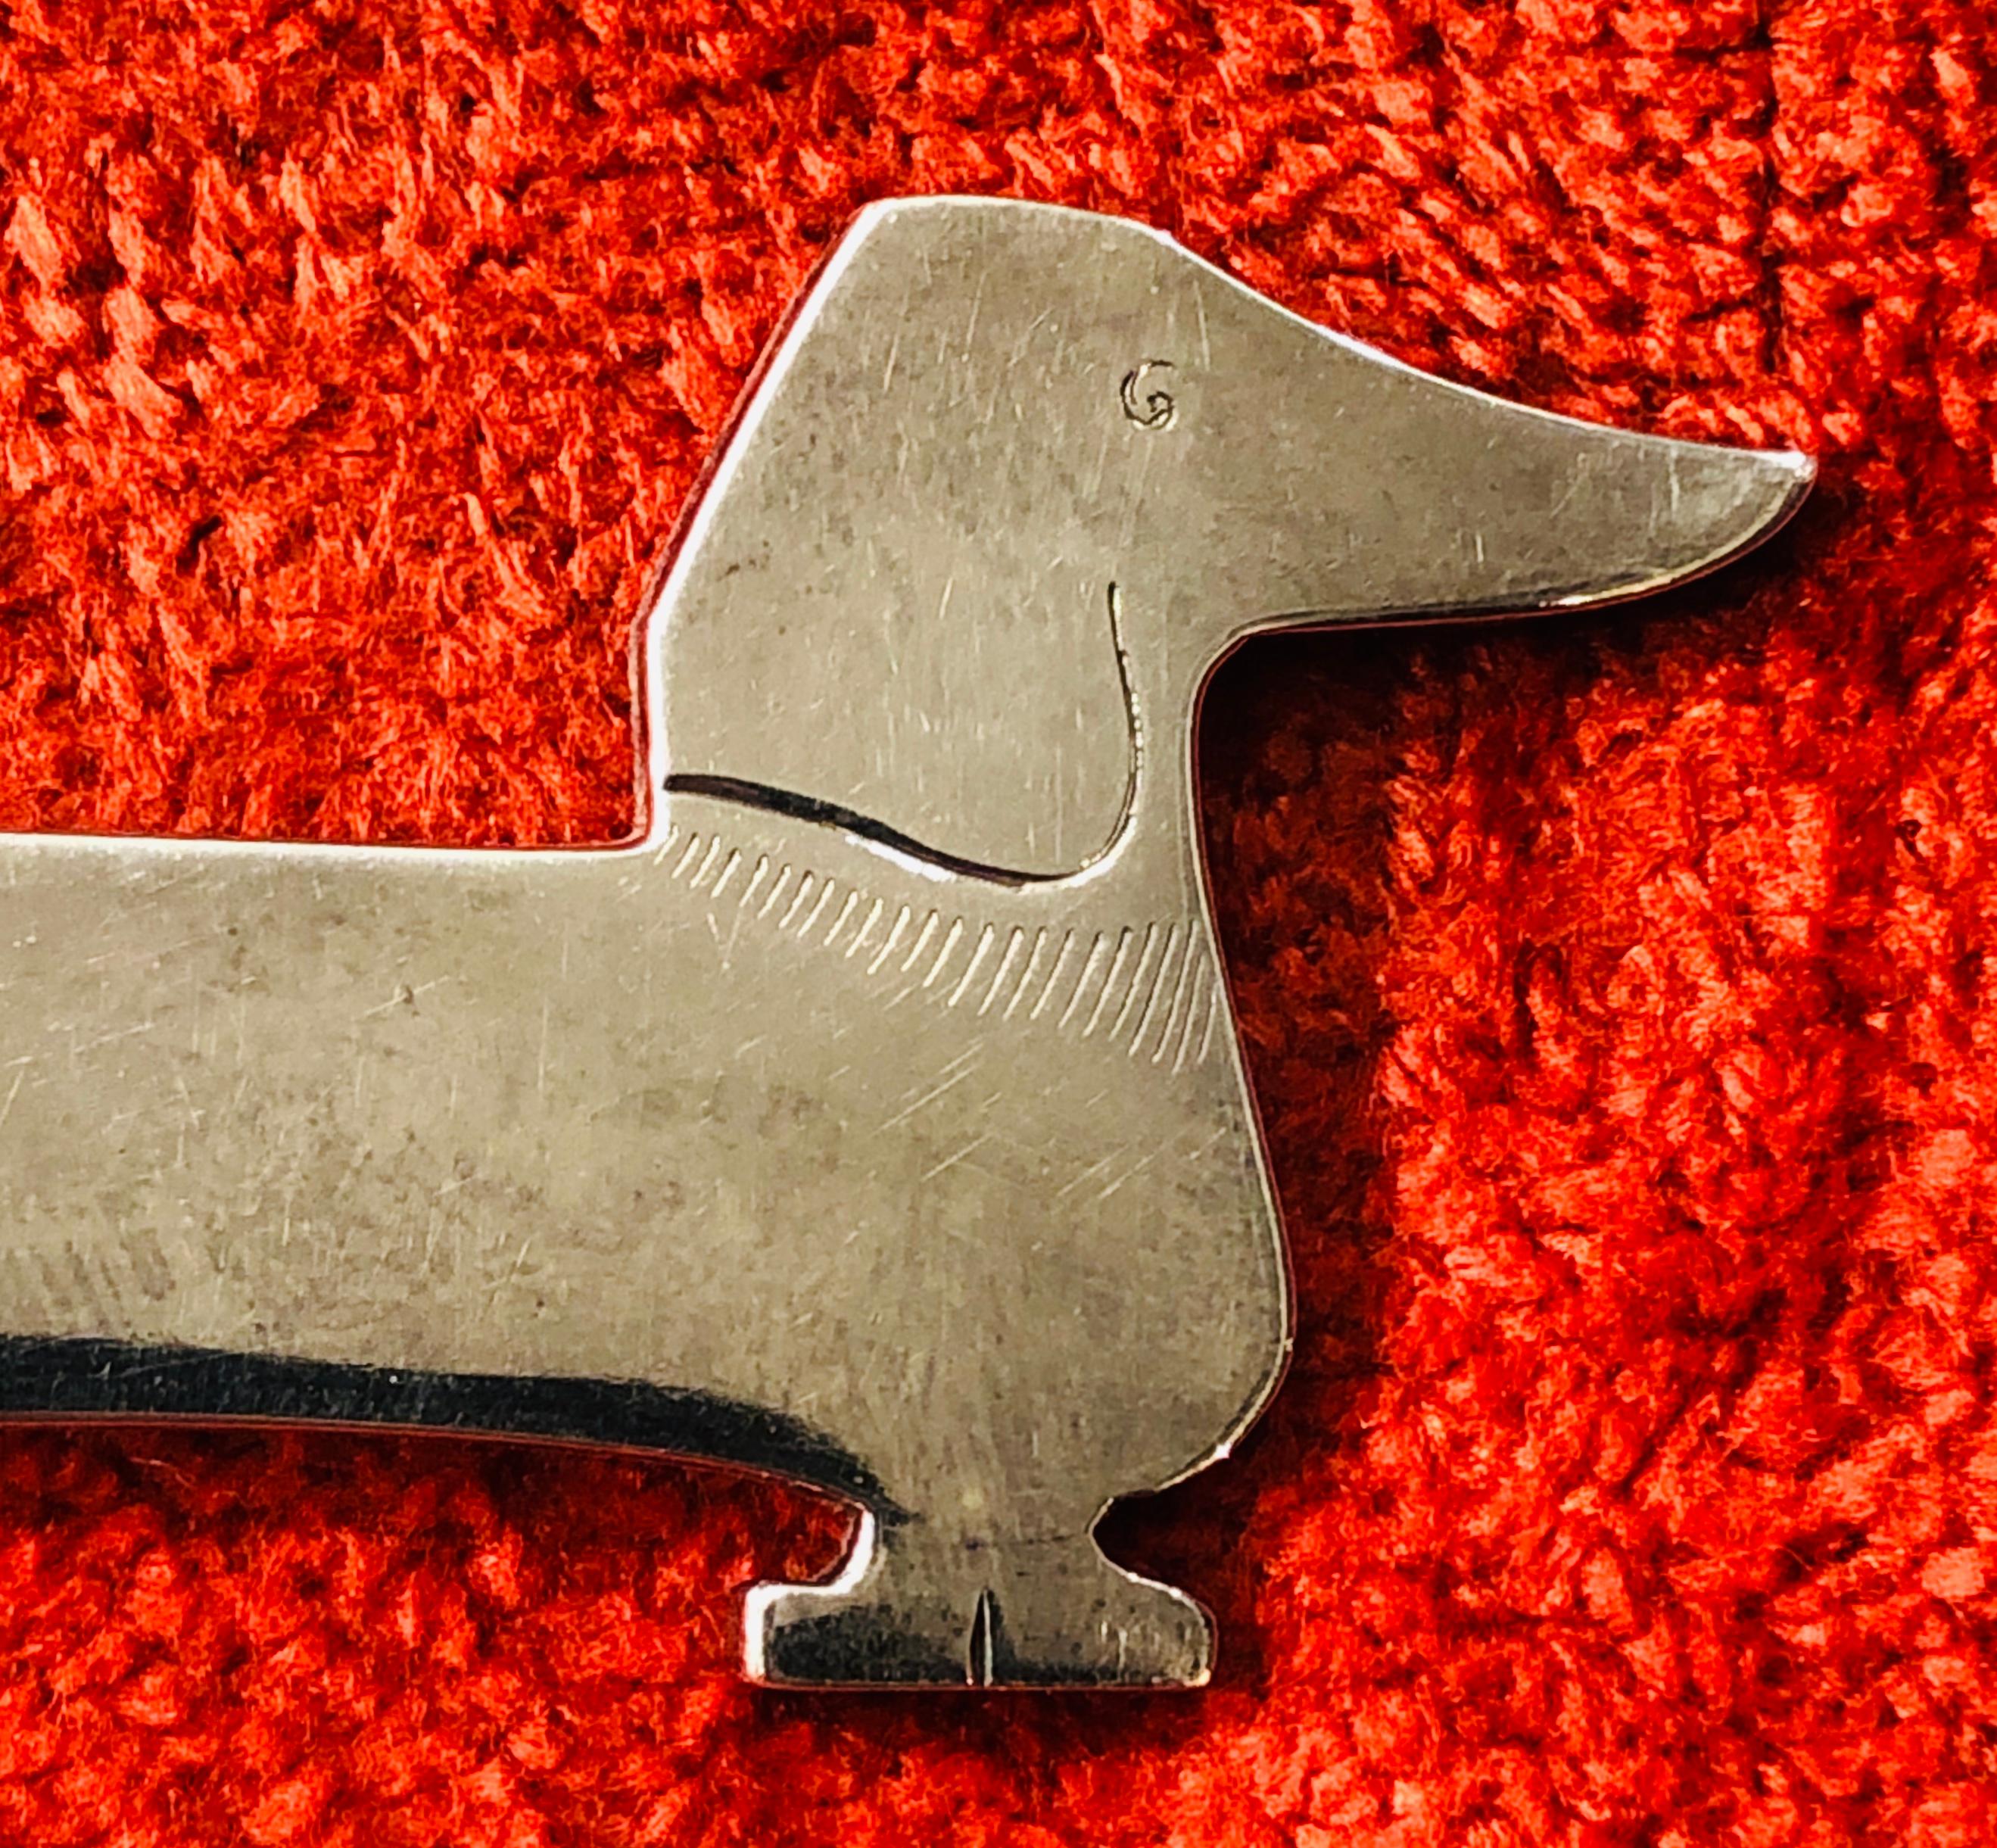 Exceptional Authentic Hermès Letter Opener

Absolutely stunning, a rare collector item

Dachshund shaped

Made in France

Vintage Item ! Super Rare, a Grail

Made of Sterling Silver 

